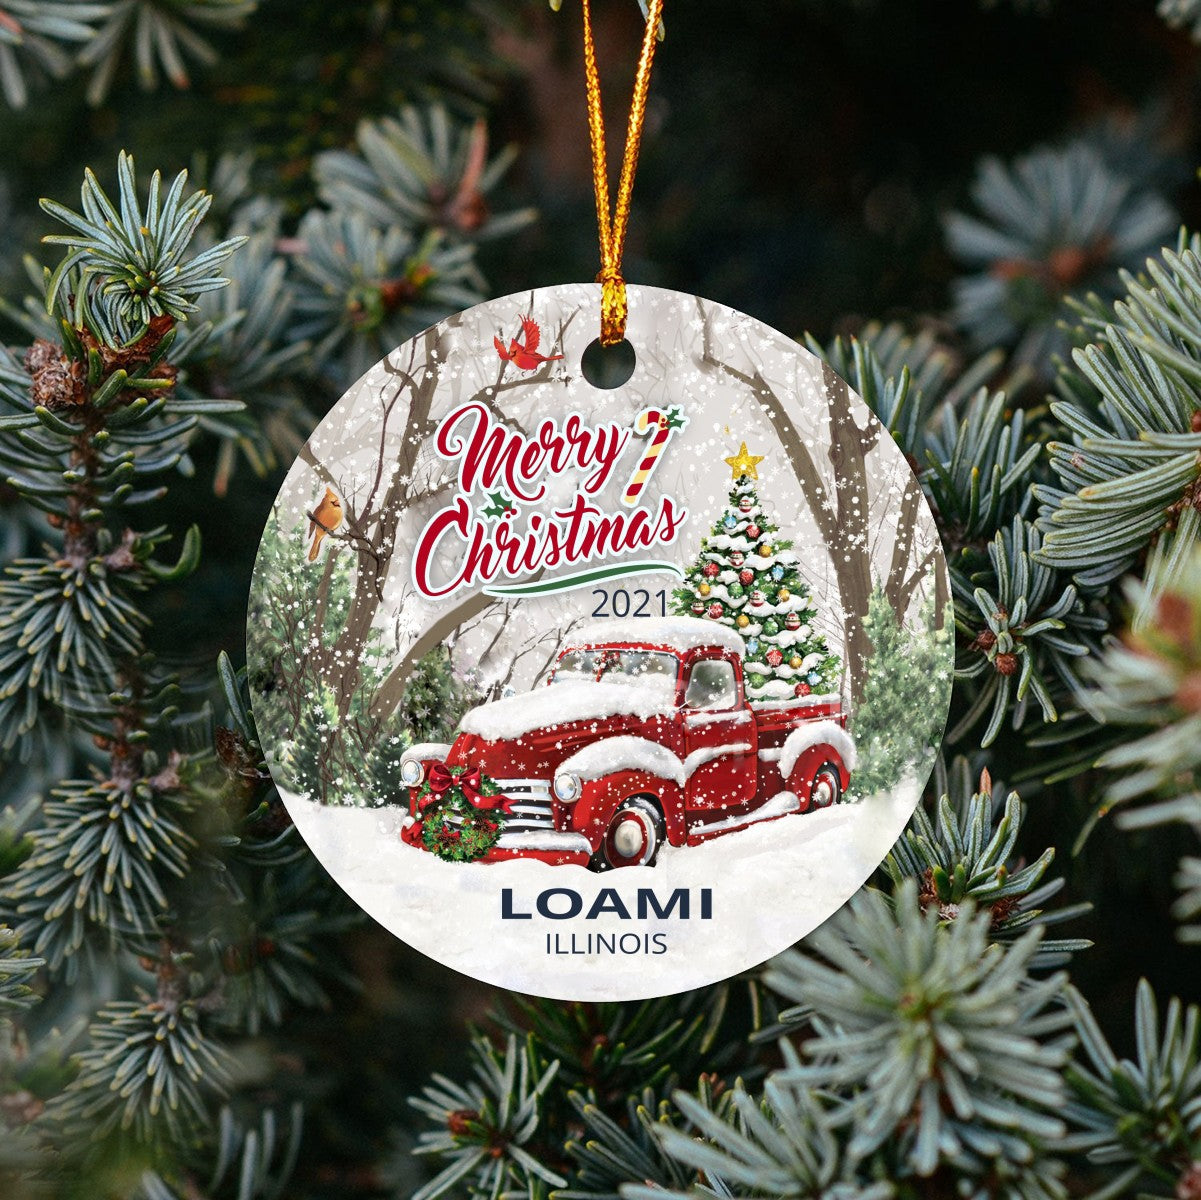 Christmas Tree Ornaments Loami - Ornament With Name City, State Loami Illinois IL Ornament - Red Truck Xmas Ornaments 3'' Plastic Gift For Family, Friend And Housewarming